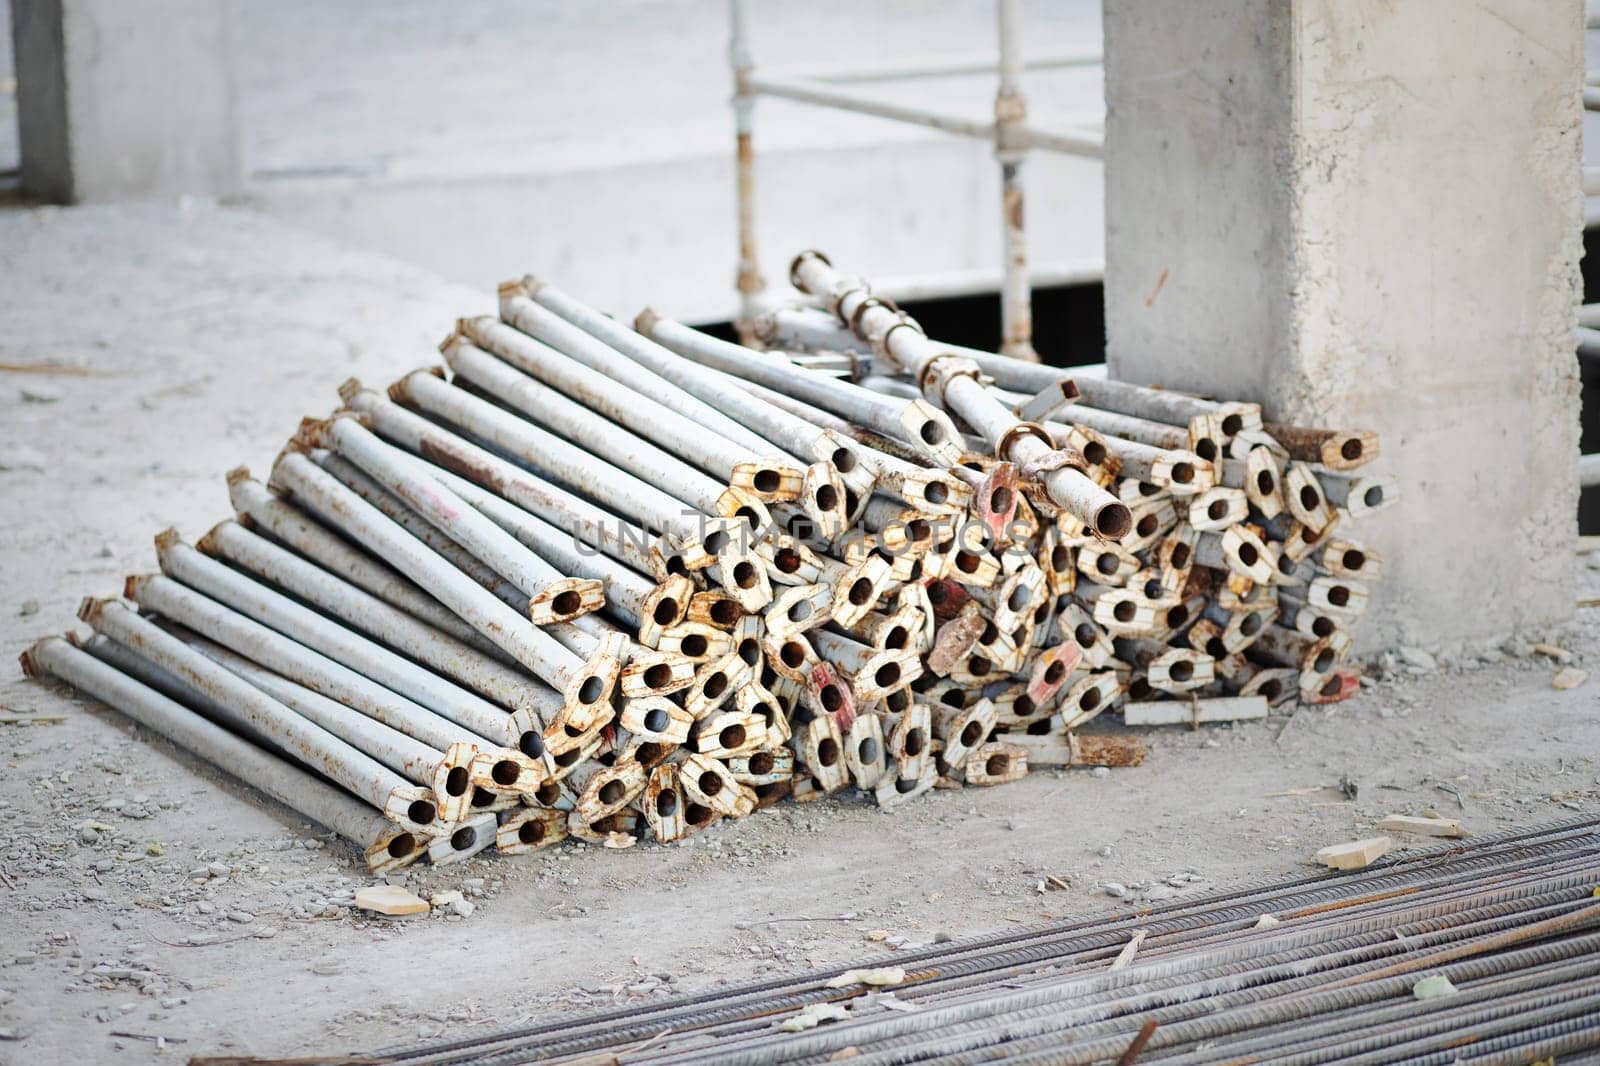 Scaffolding racks in disassembled form lie near a reinforced concrete column on a construction site.